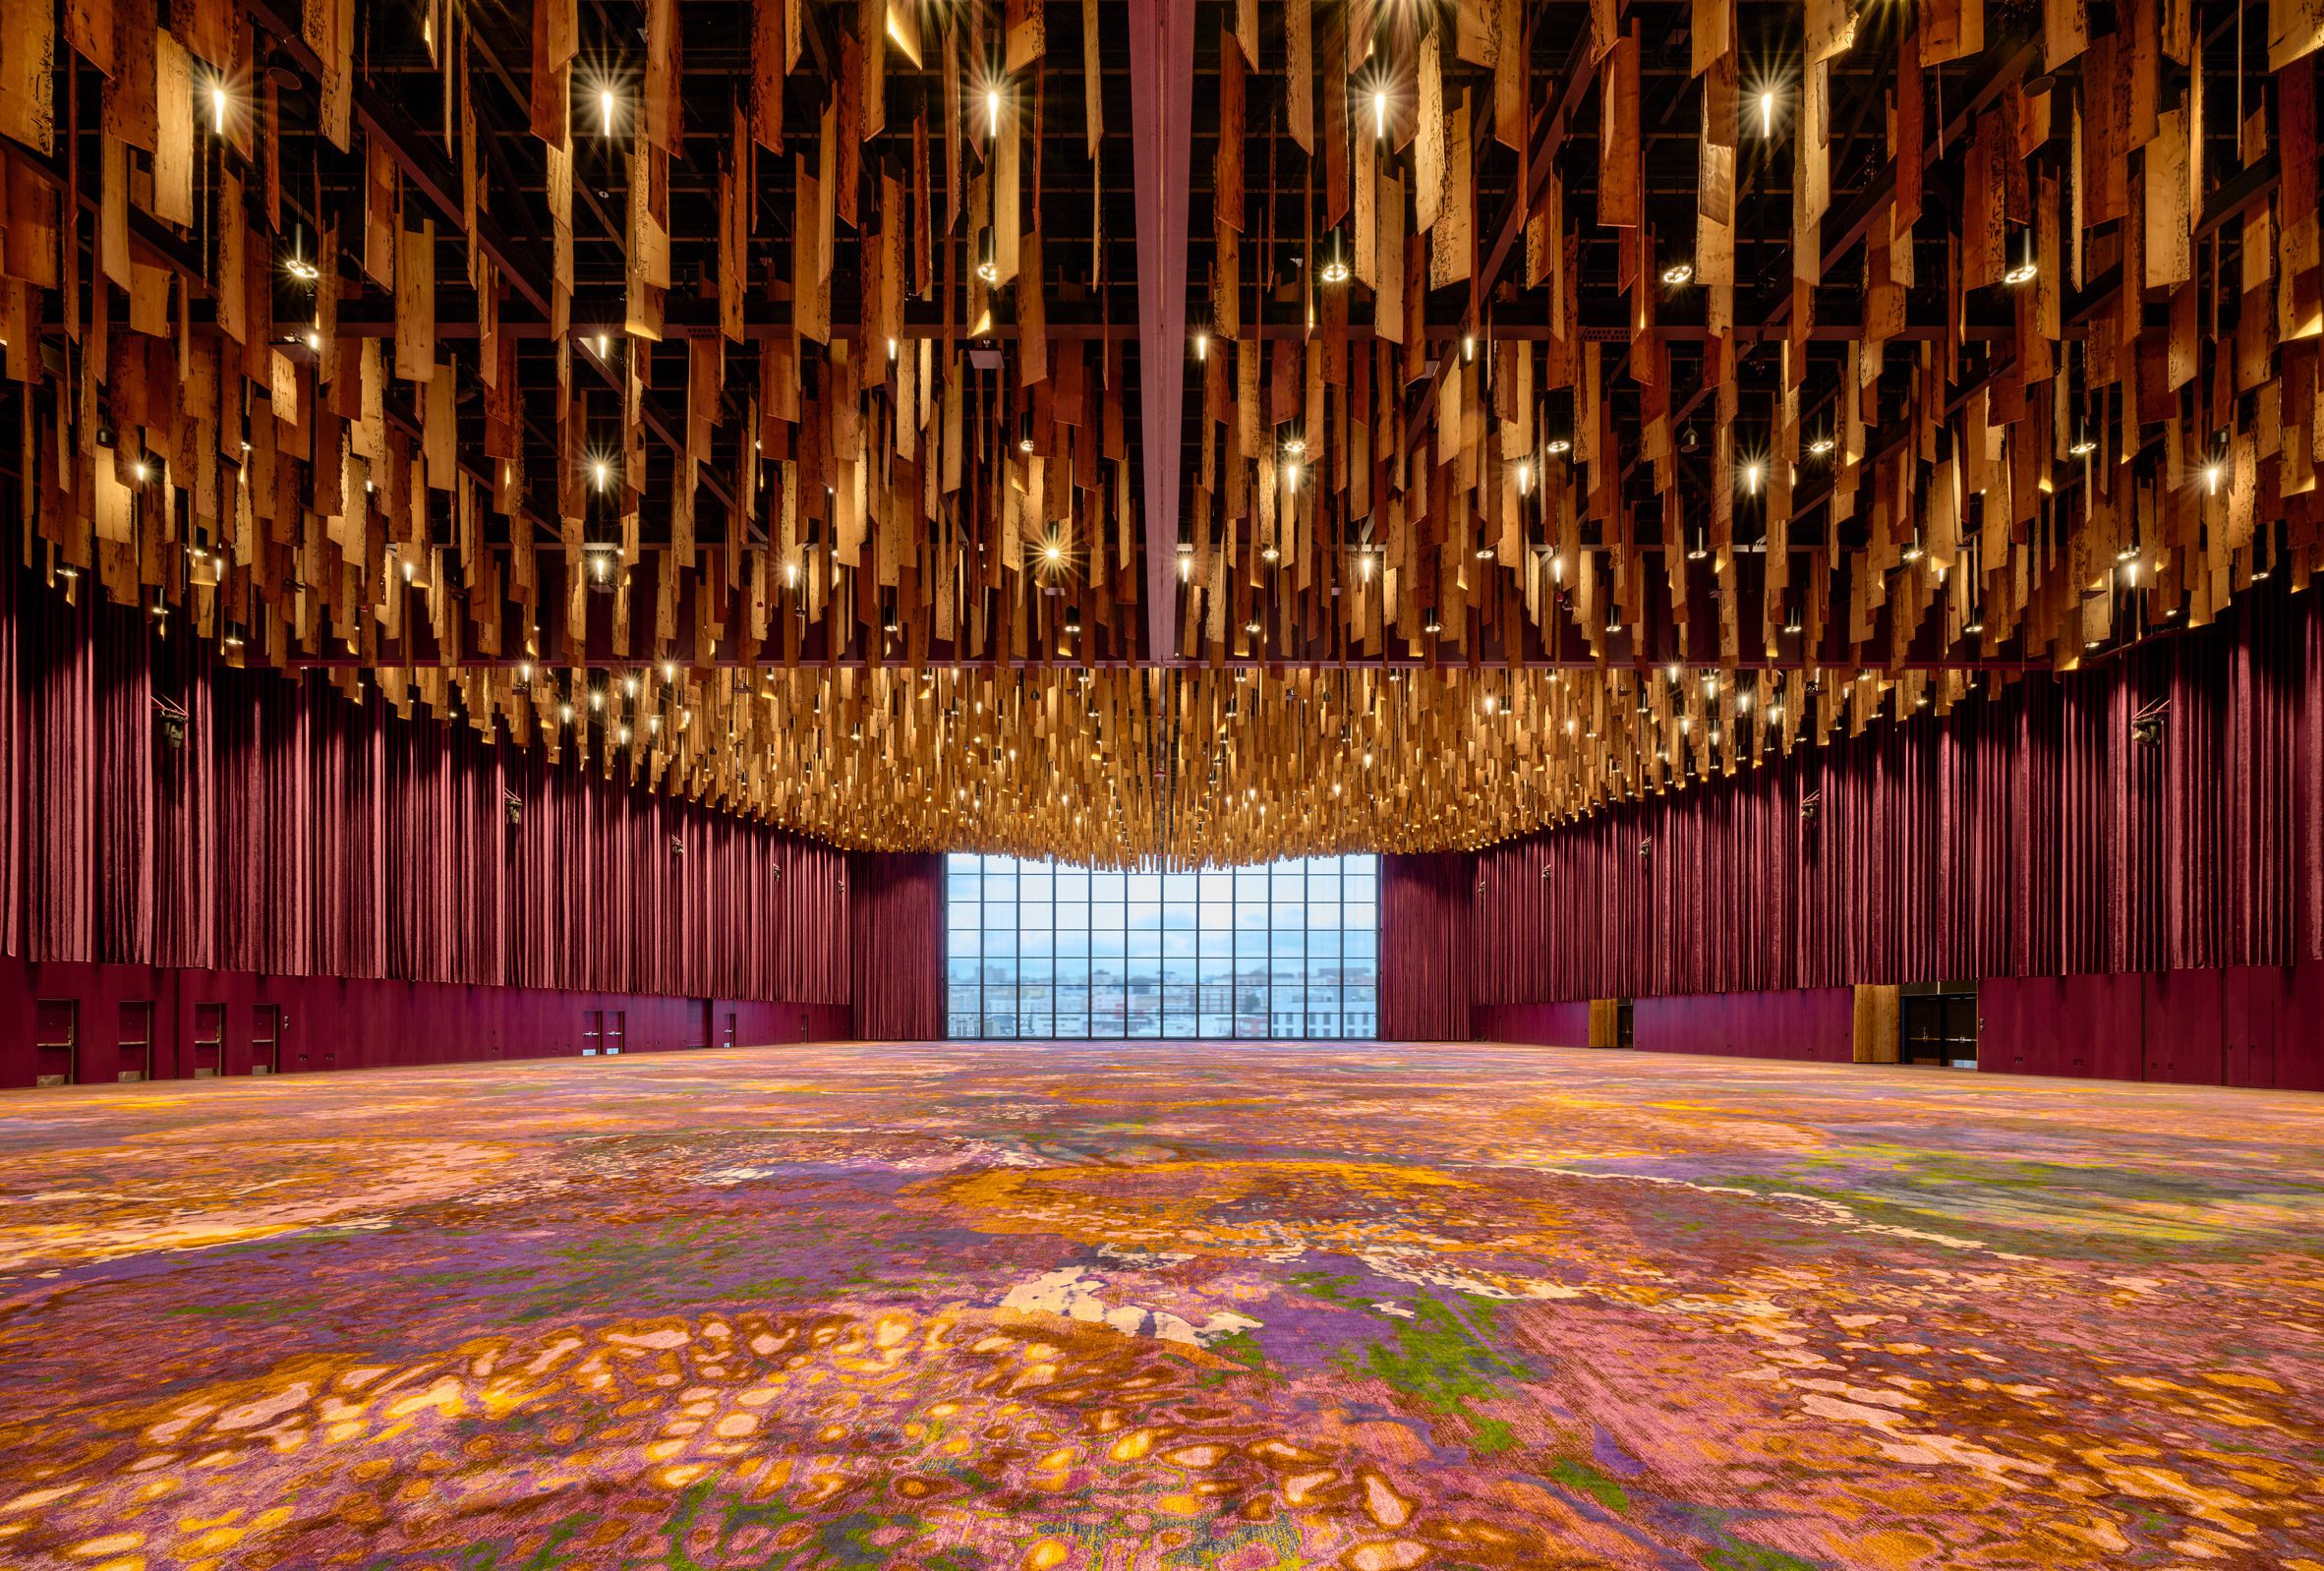 Large room with wooden planks hanging from ceiling with a bright carpet